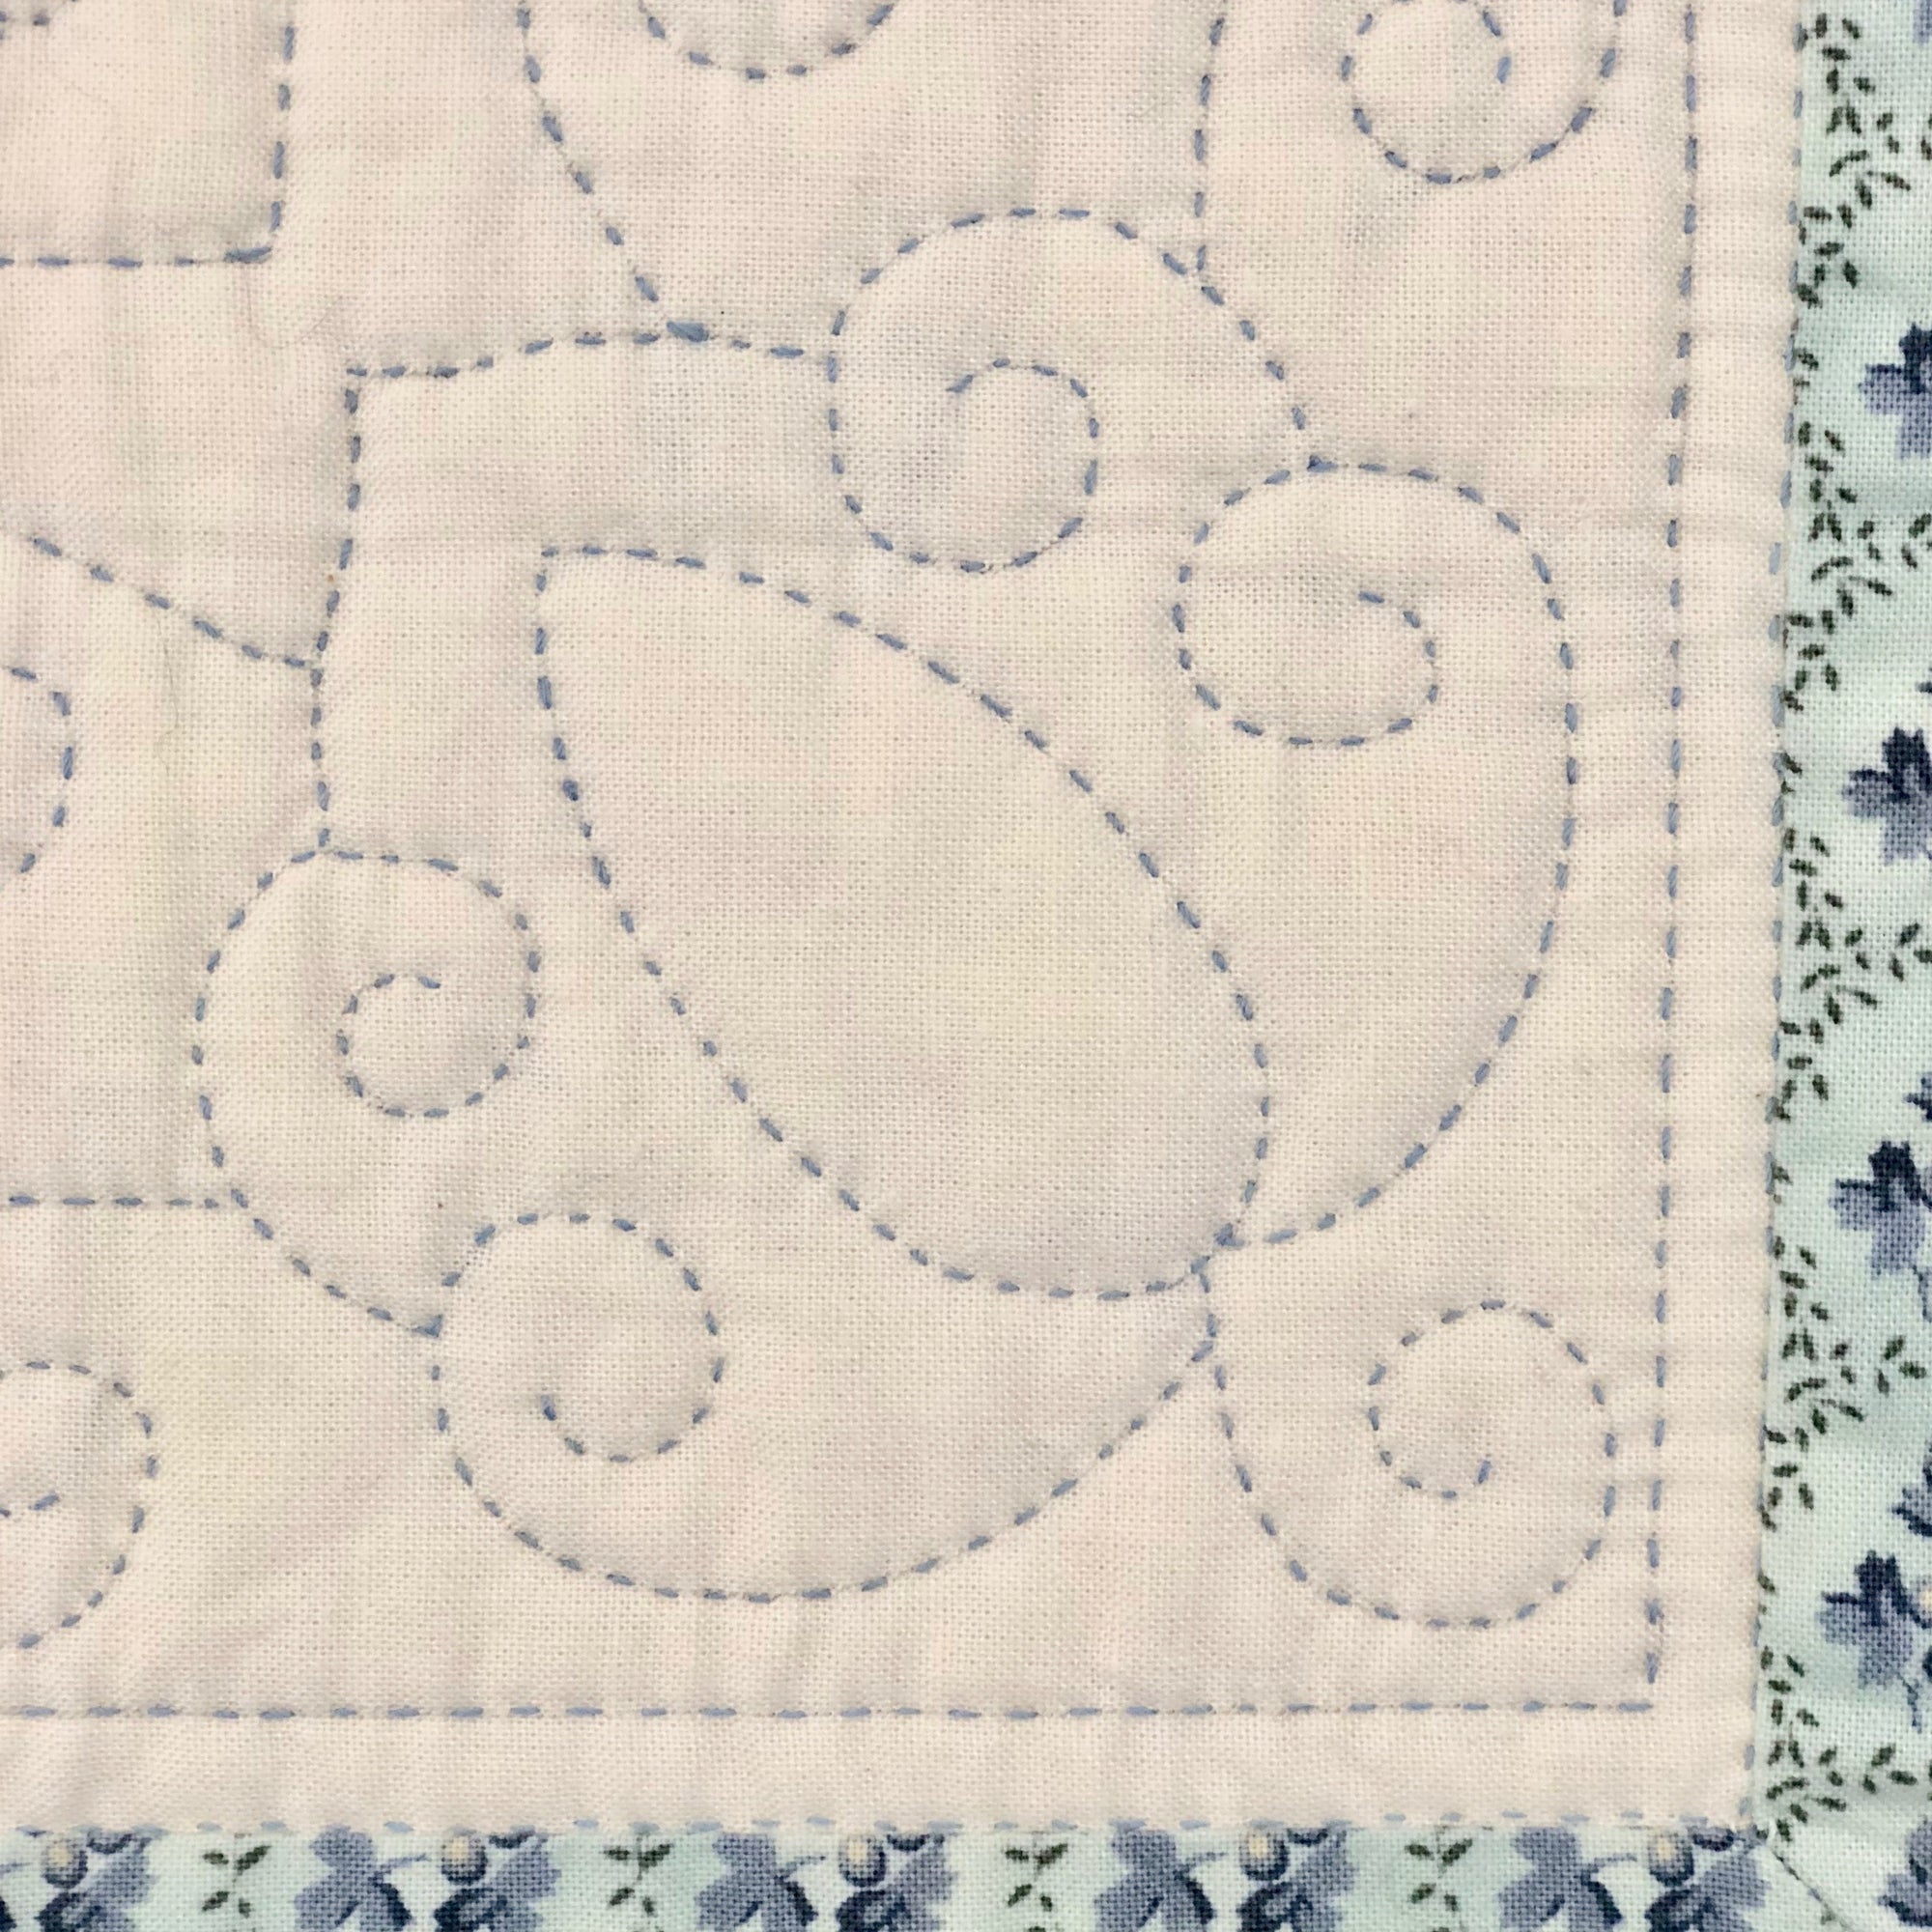 The Hand Quilting Stitch 3 Part Series - begins March 13